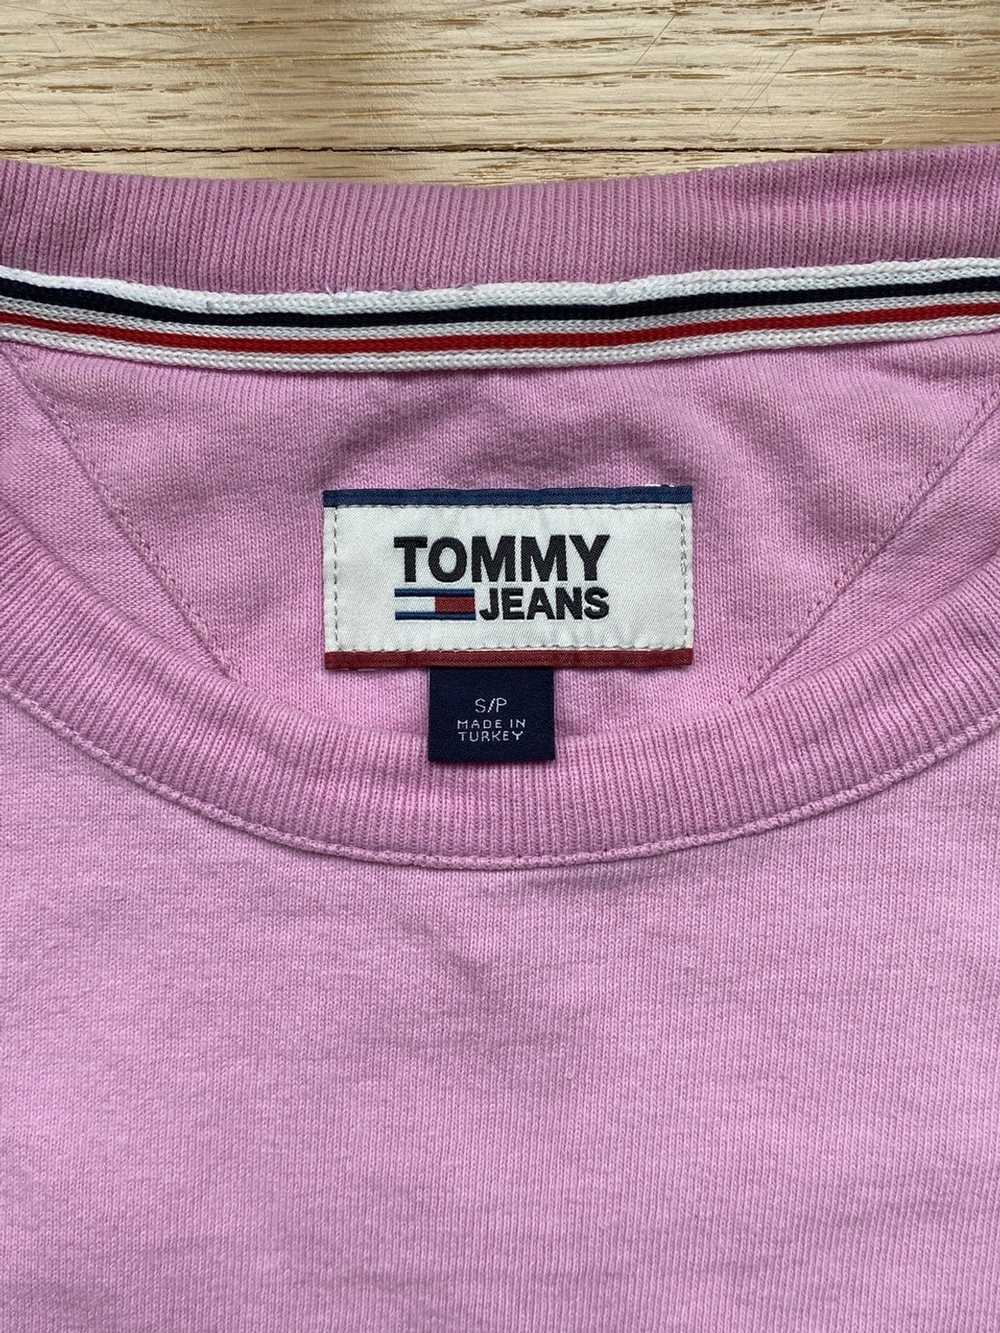 Tommy Jeans Tommy Jeans Pink Logo Tee - image 3